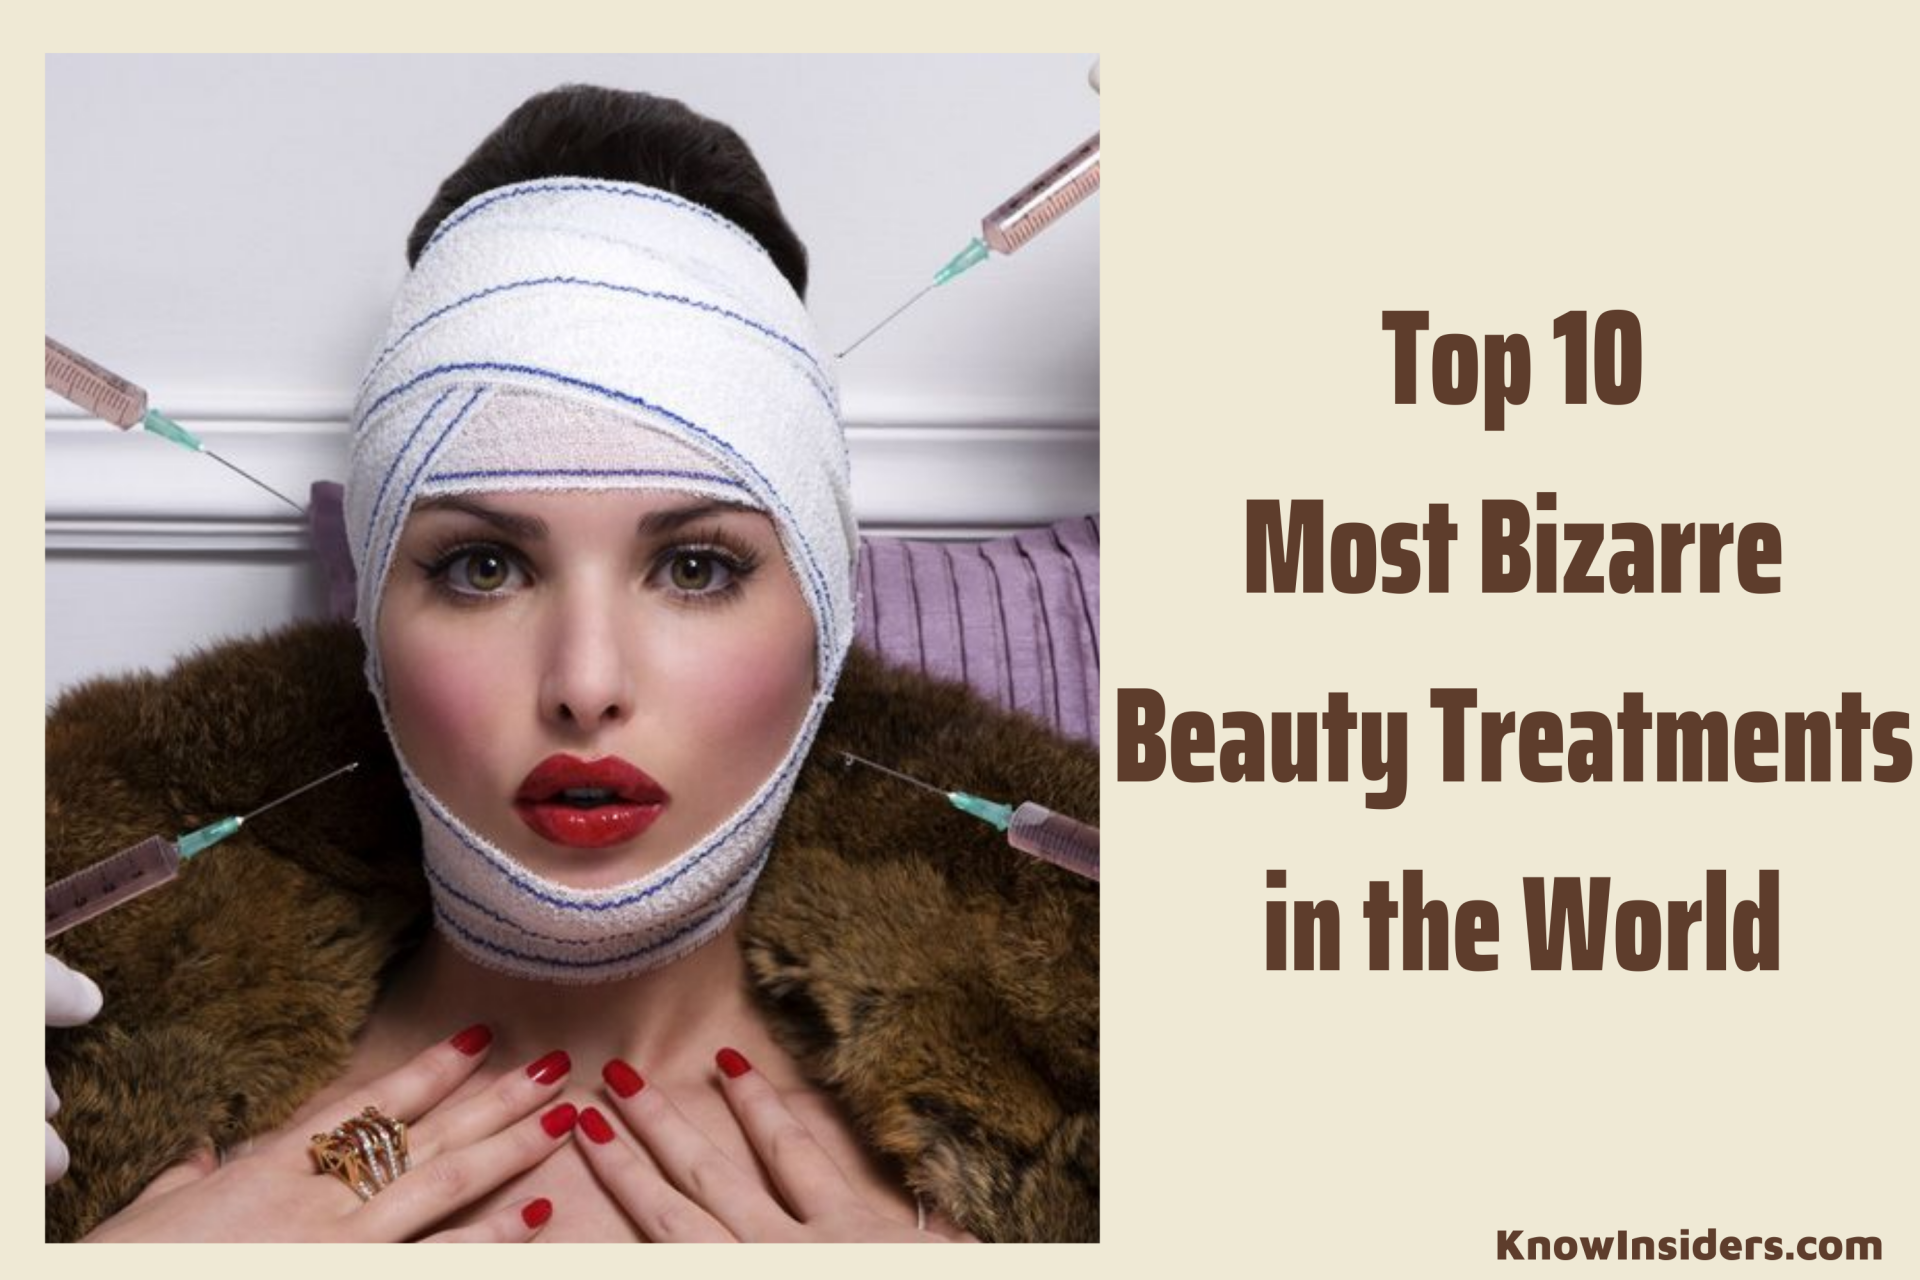 Top 10 Most Bizarre Beauty Treatments in the world